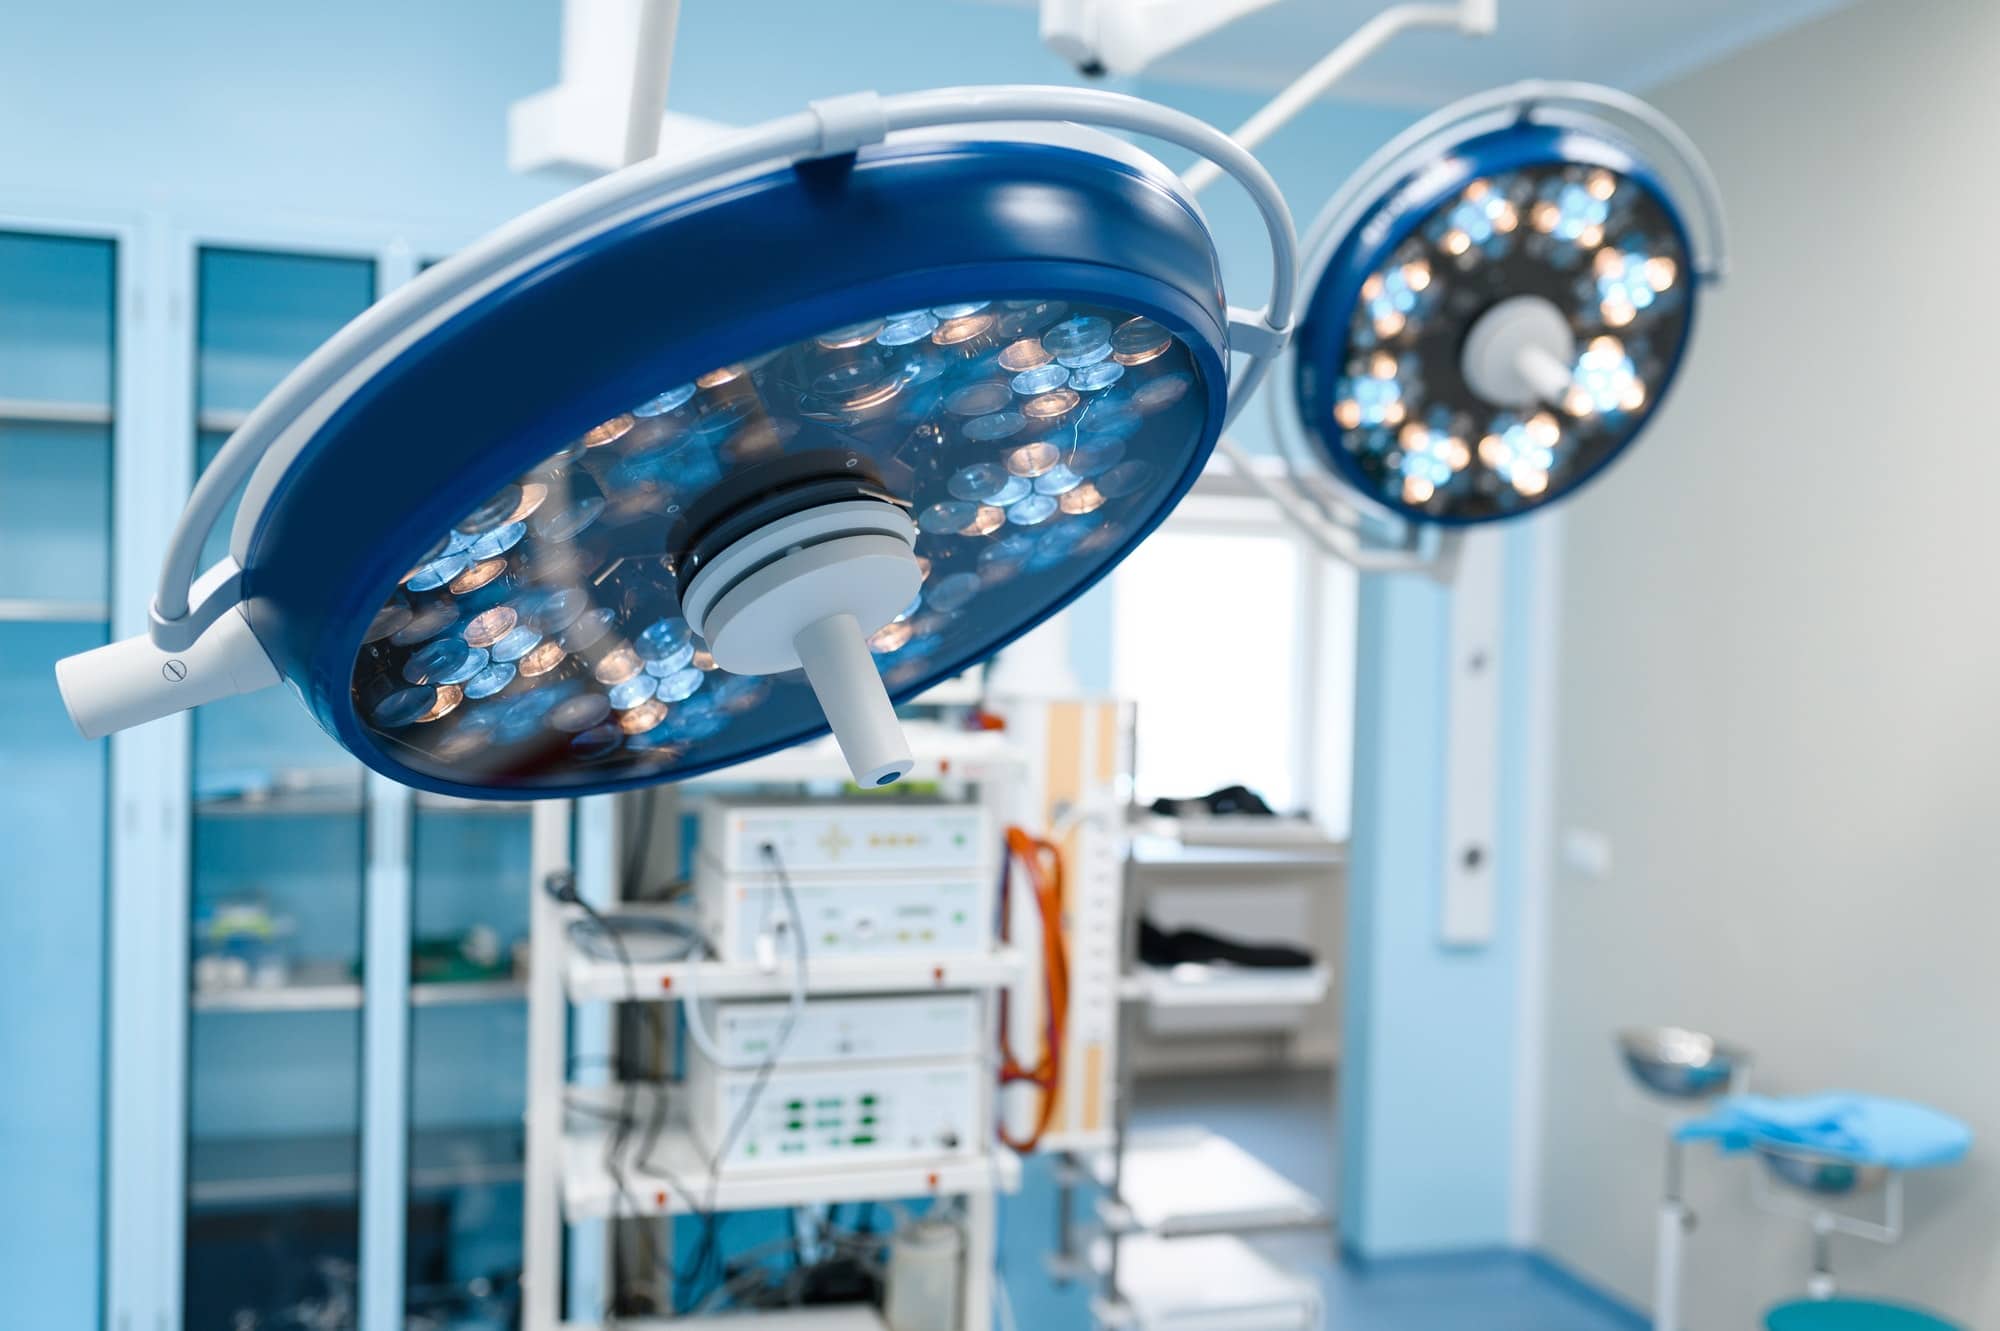 Professional surgery, lamps in operating room